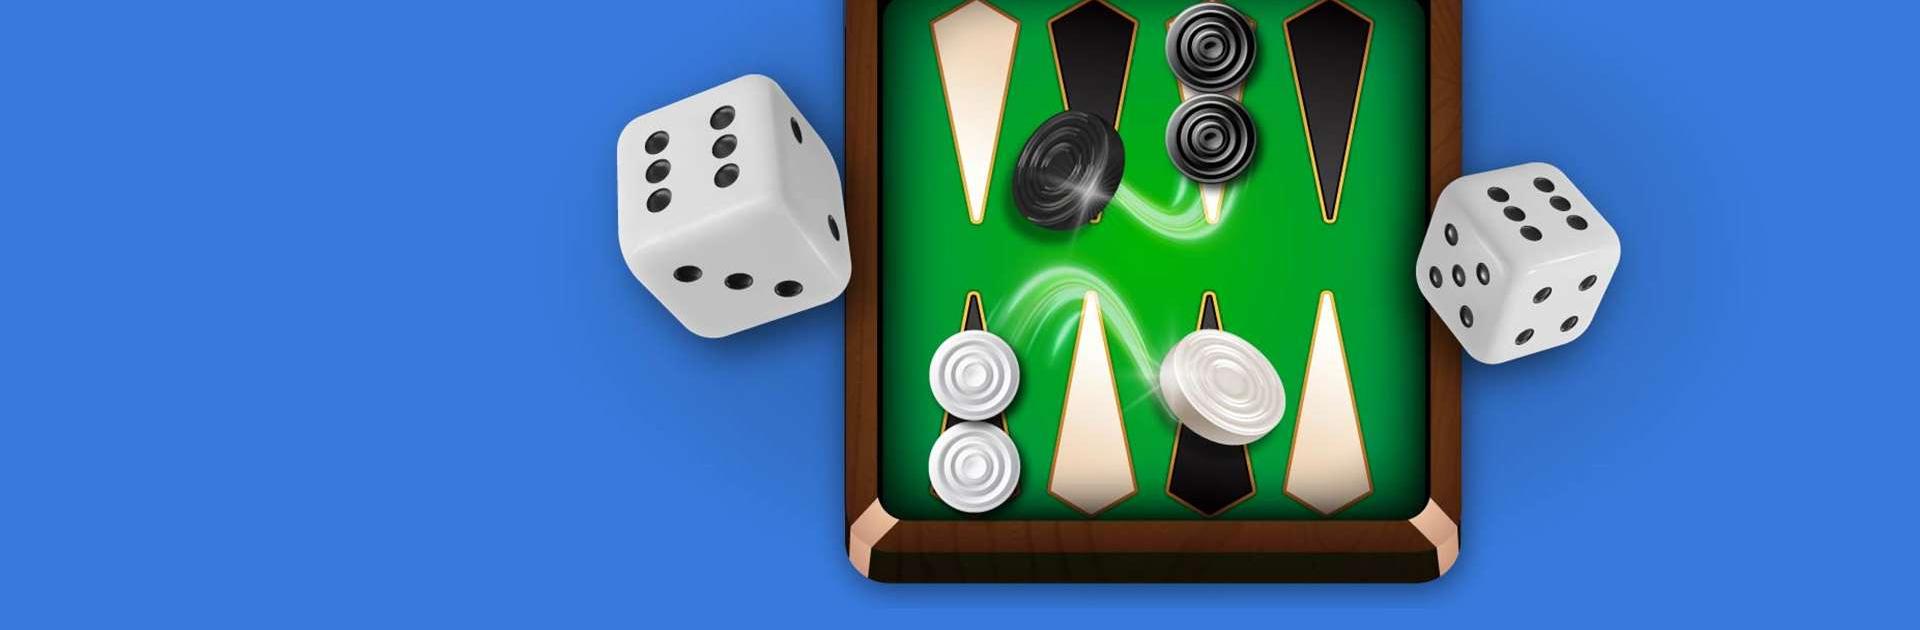 Play Backgammon Deluxe Edition Online